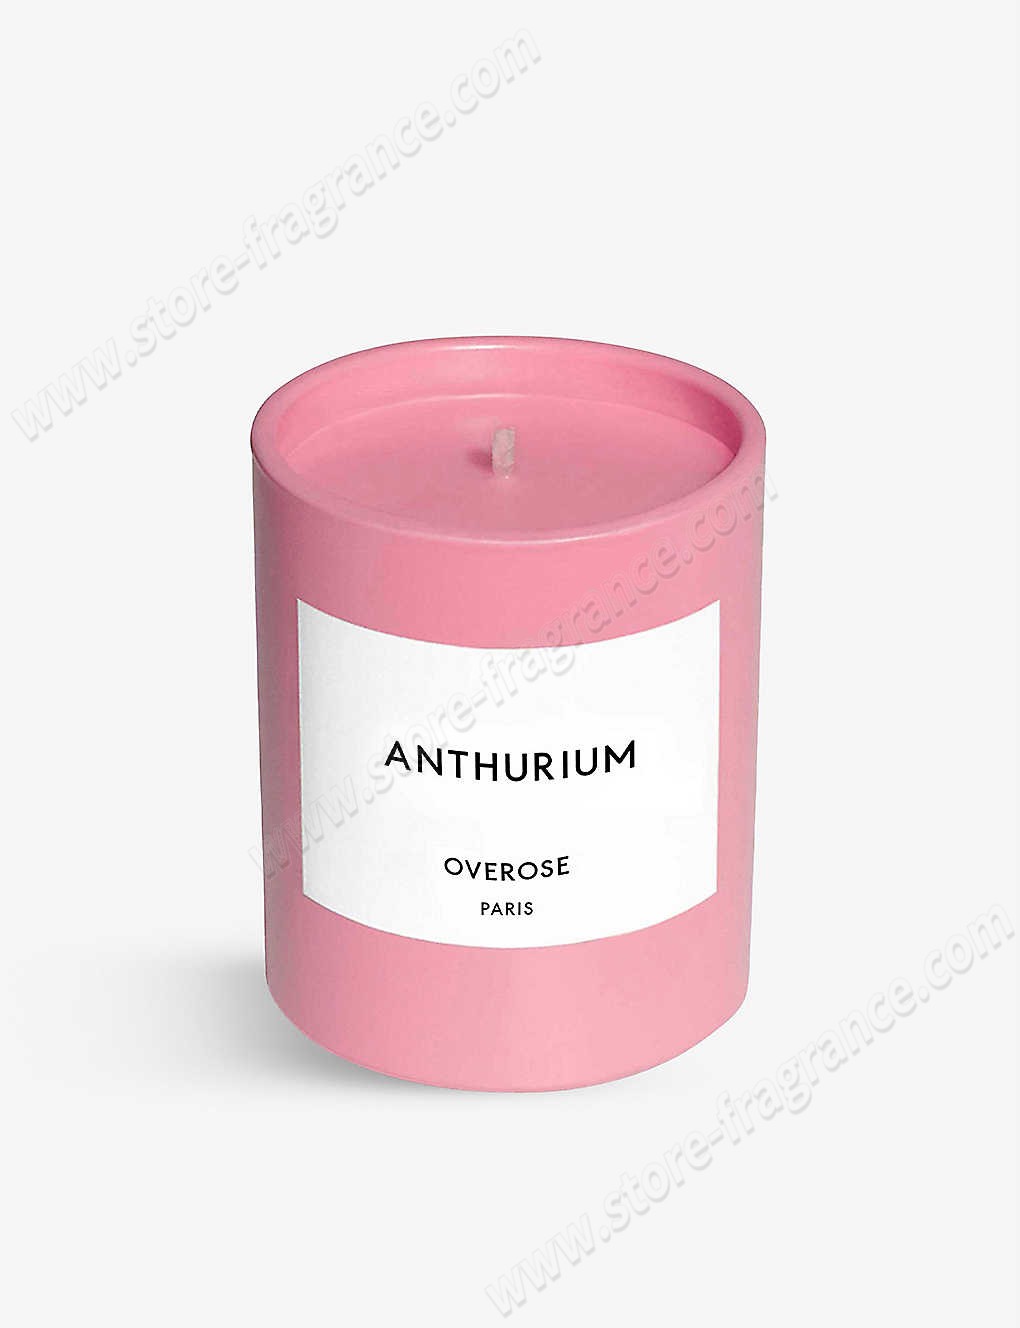 OVEROSE/Anthurium scented candle 200g ✿ Discount Store - -0